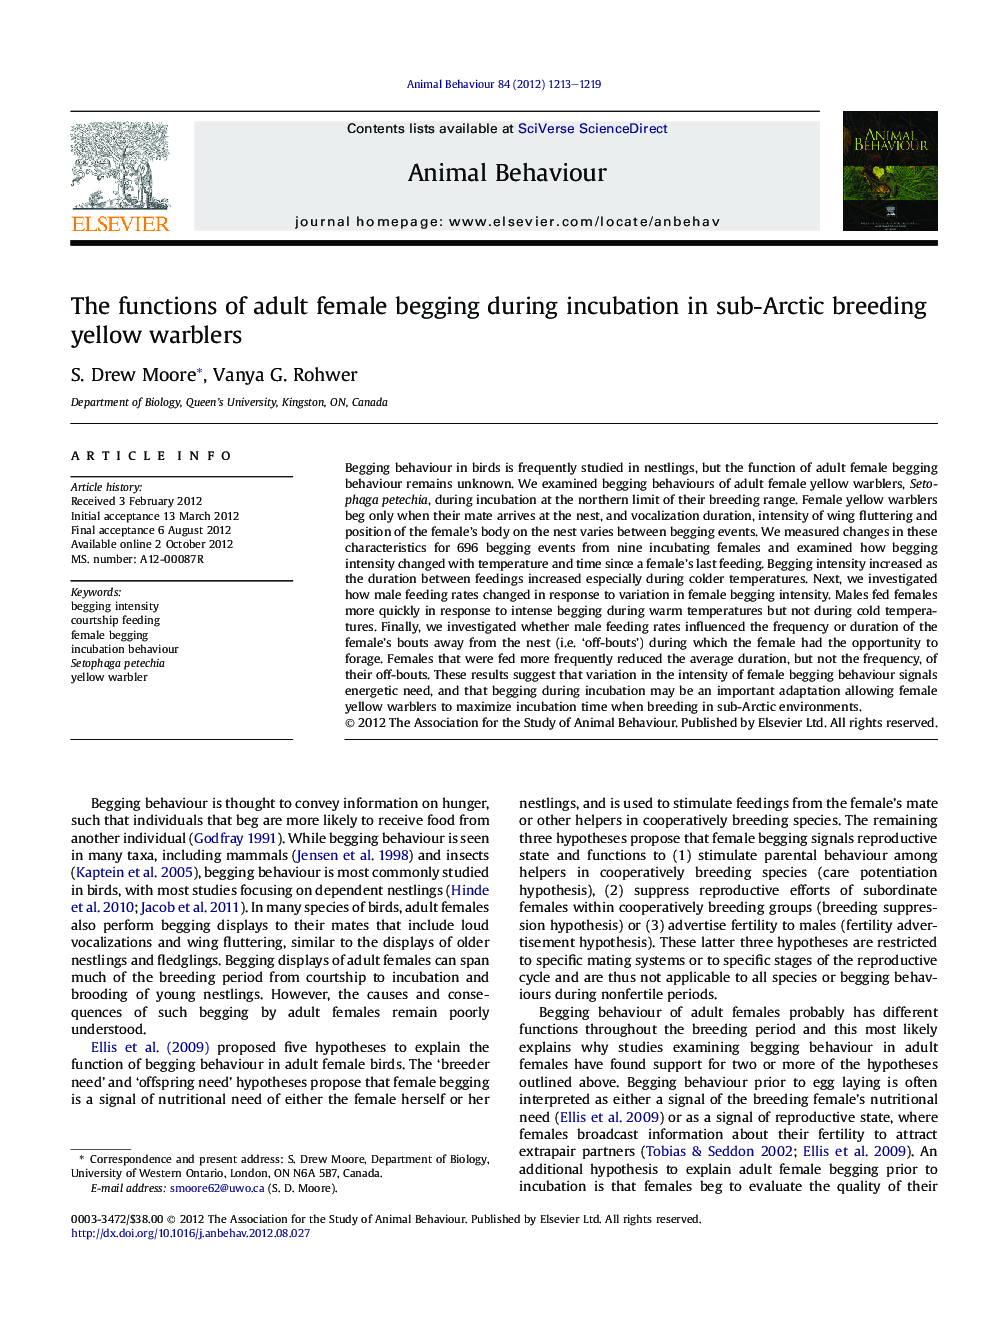 The functions of adult female begging during incubation in sub-Arctic breeding yellow warblers